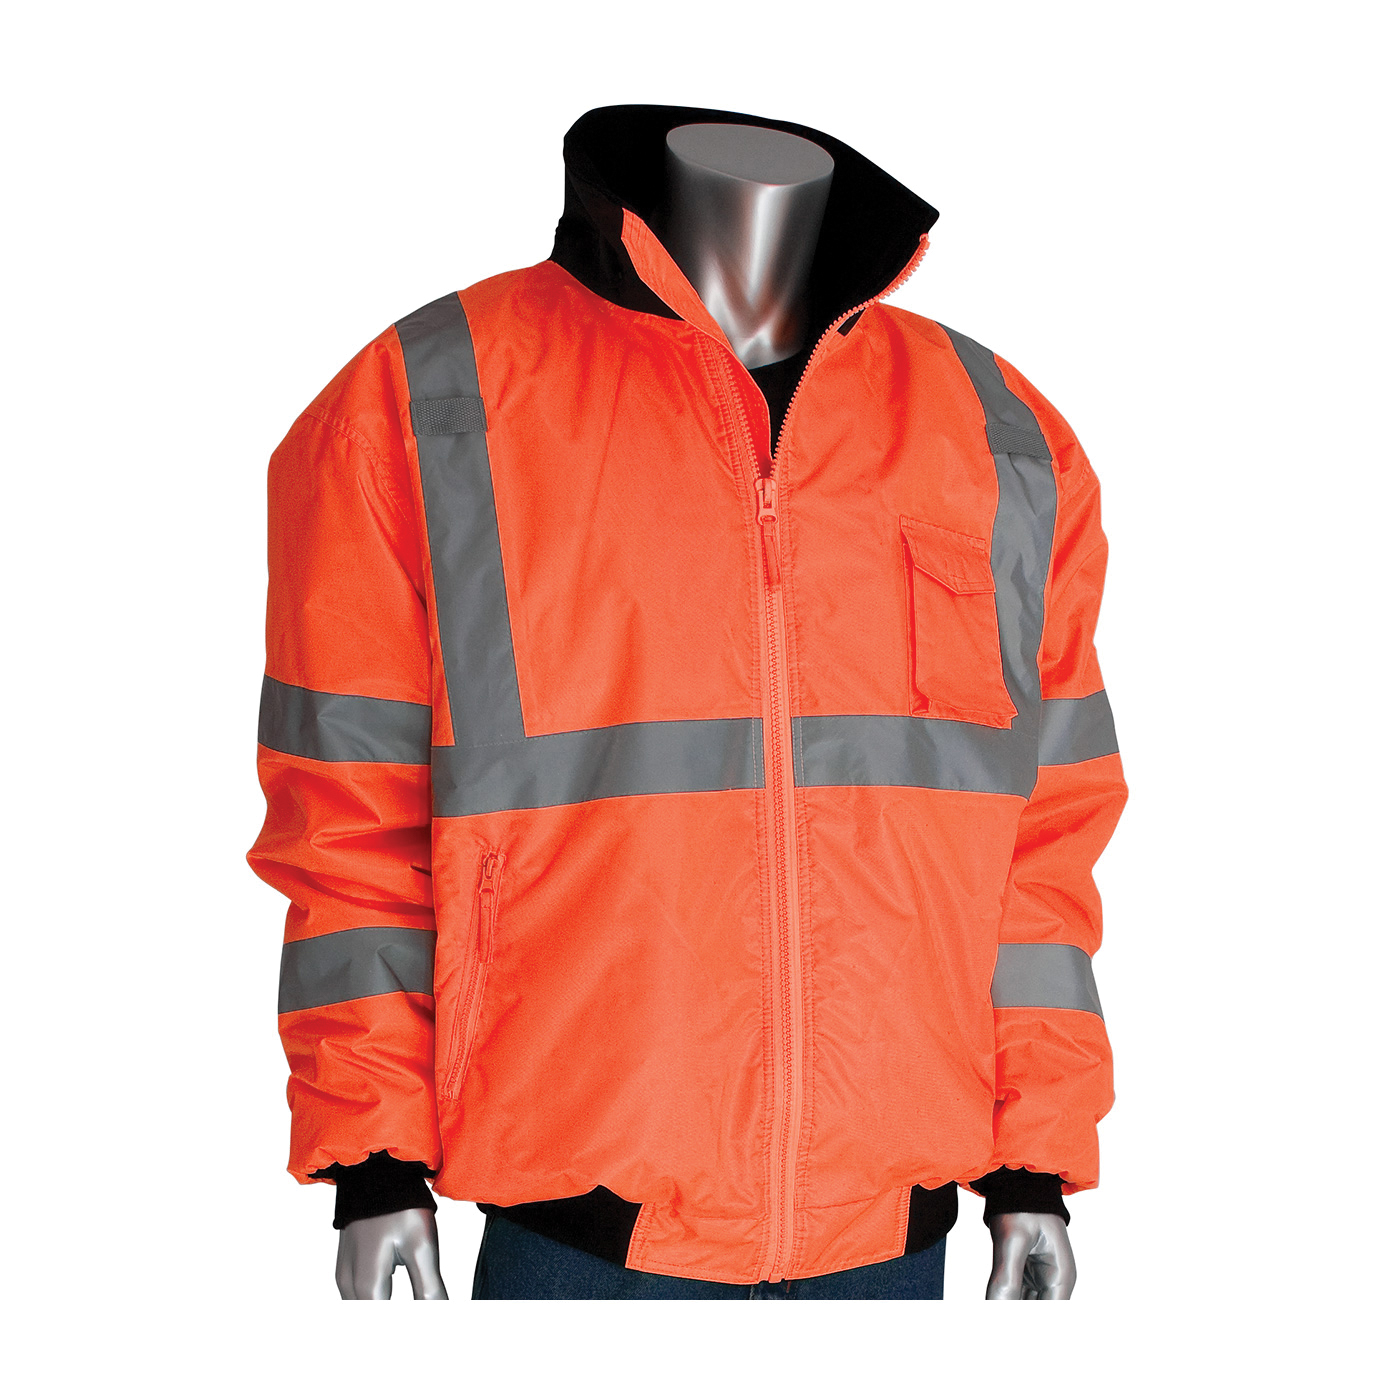 PIP® 333-1762-OR/4X Bomber Jacket With Zip-Out Fleece Liner, Hi-Viz Lime Orange, Polyester, 70 in Chest, Resists: Water, Specifications Met: ANSI 107 Class 3 Type R